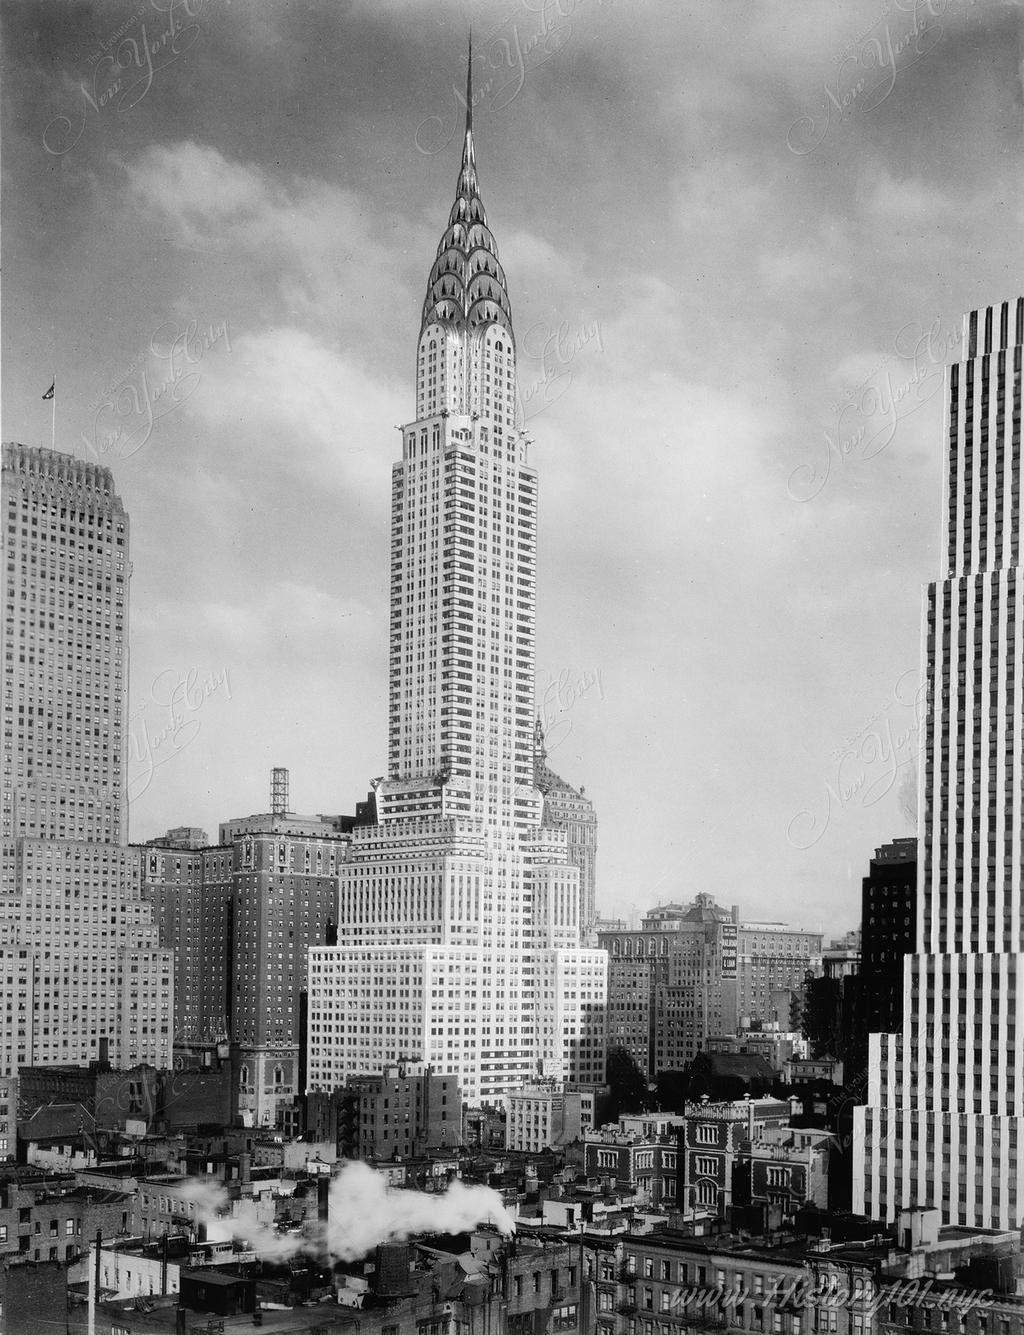 Photograph of the Chrysler Building, designed by architect William Van Alen and completed on May 27, 1930.